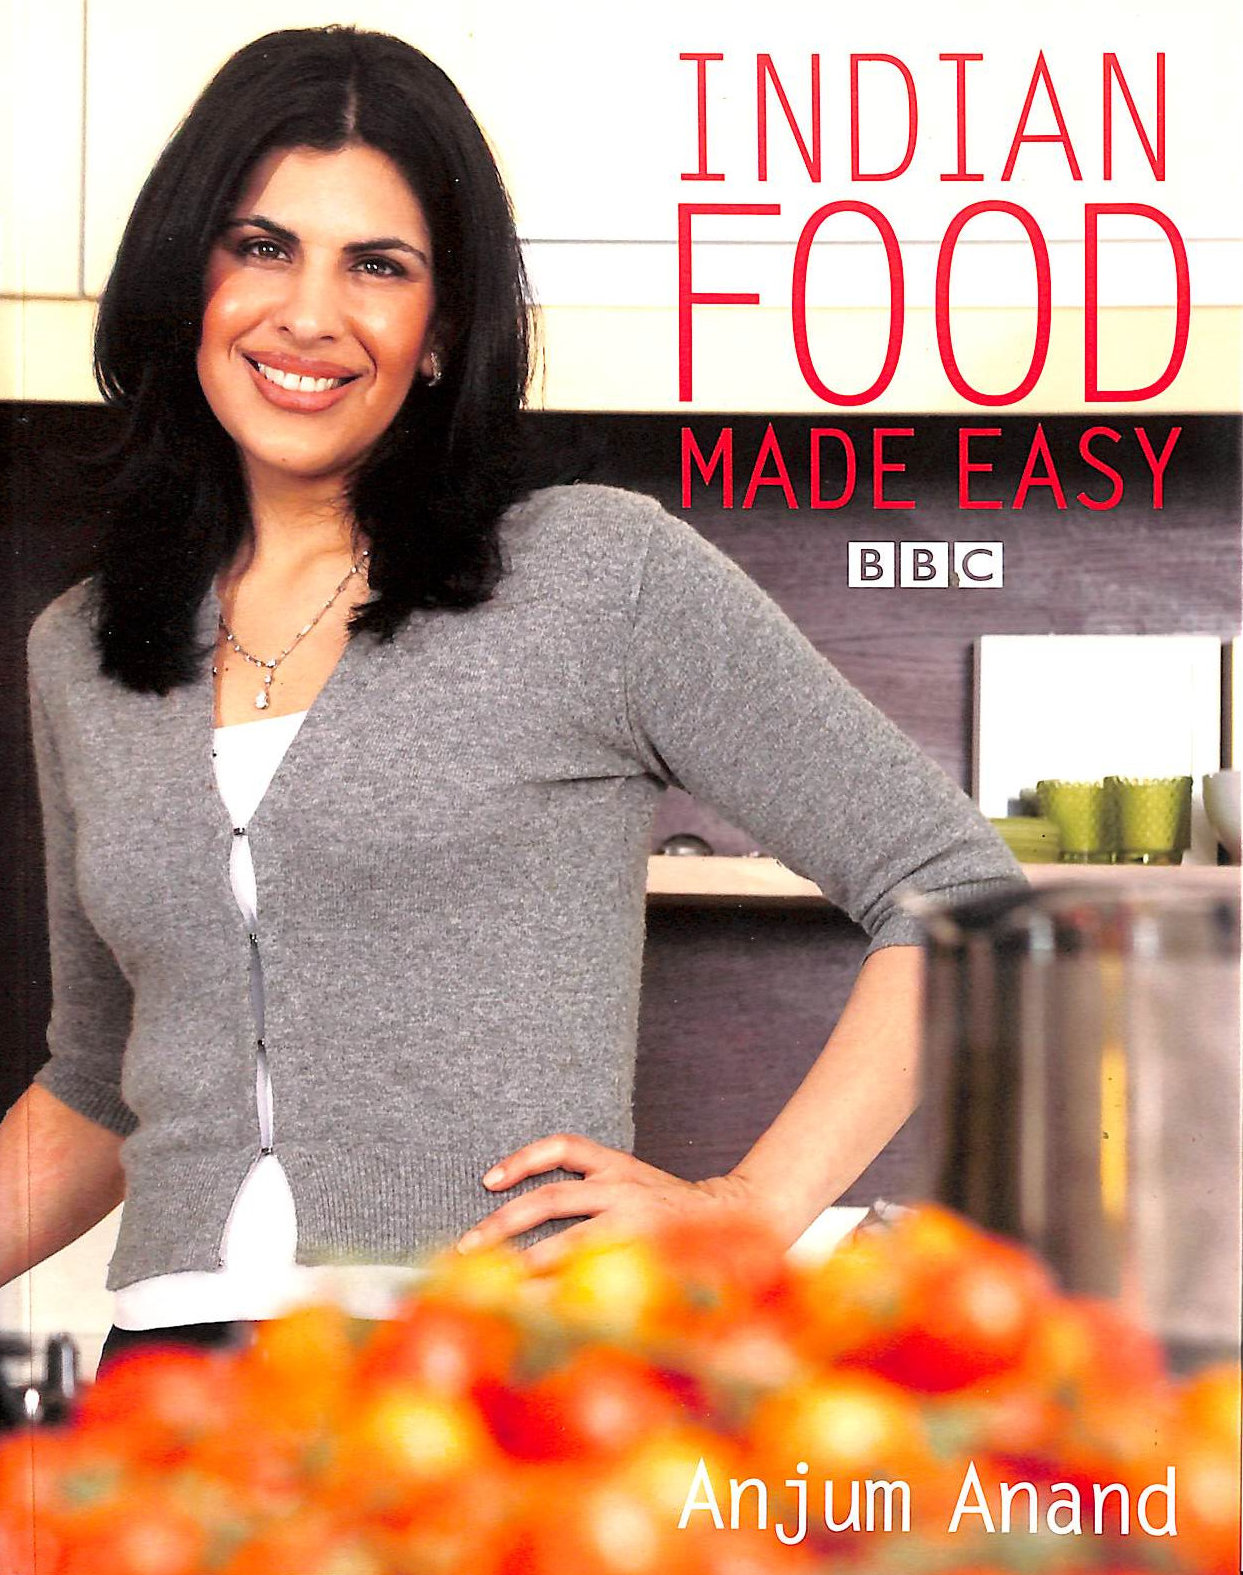 ANJUM ANAND - Indian Food Made Easy